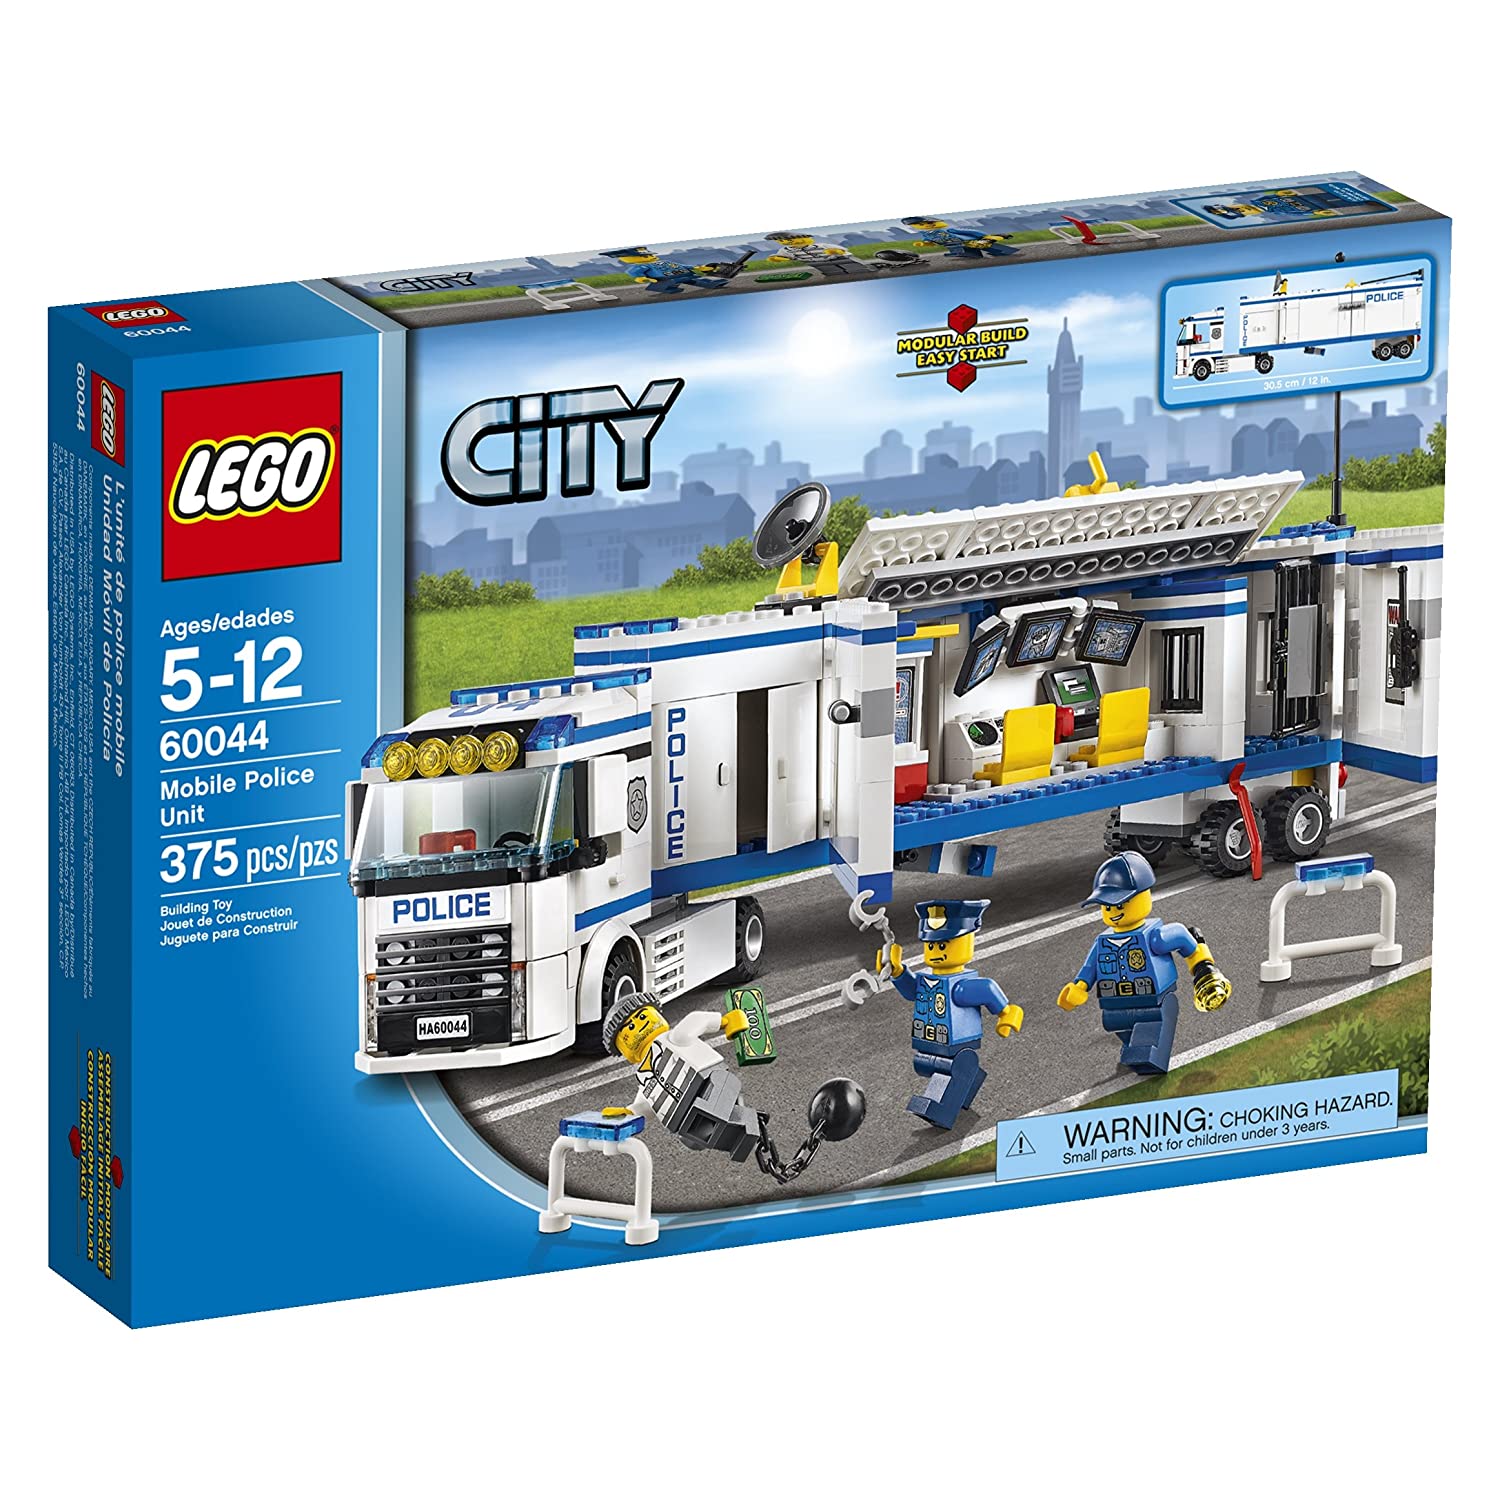 9 Best LEGO Police Station Set 2022 - Buying Guide & Reviews 9